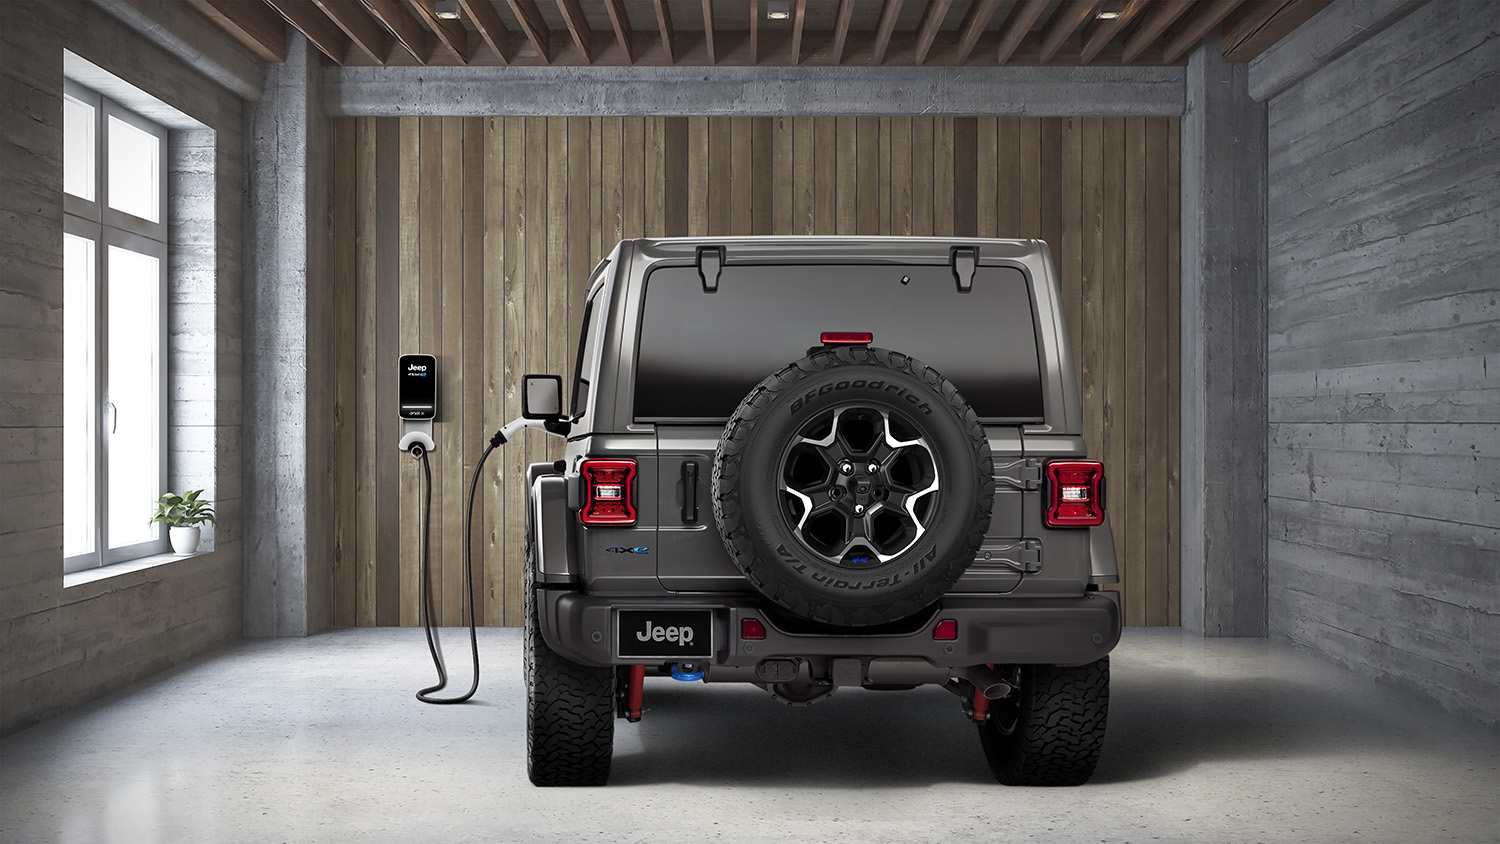 Mopar introduces new level 2 plug in chargers for Jeep Wrangler 4xe